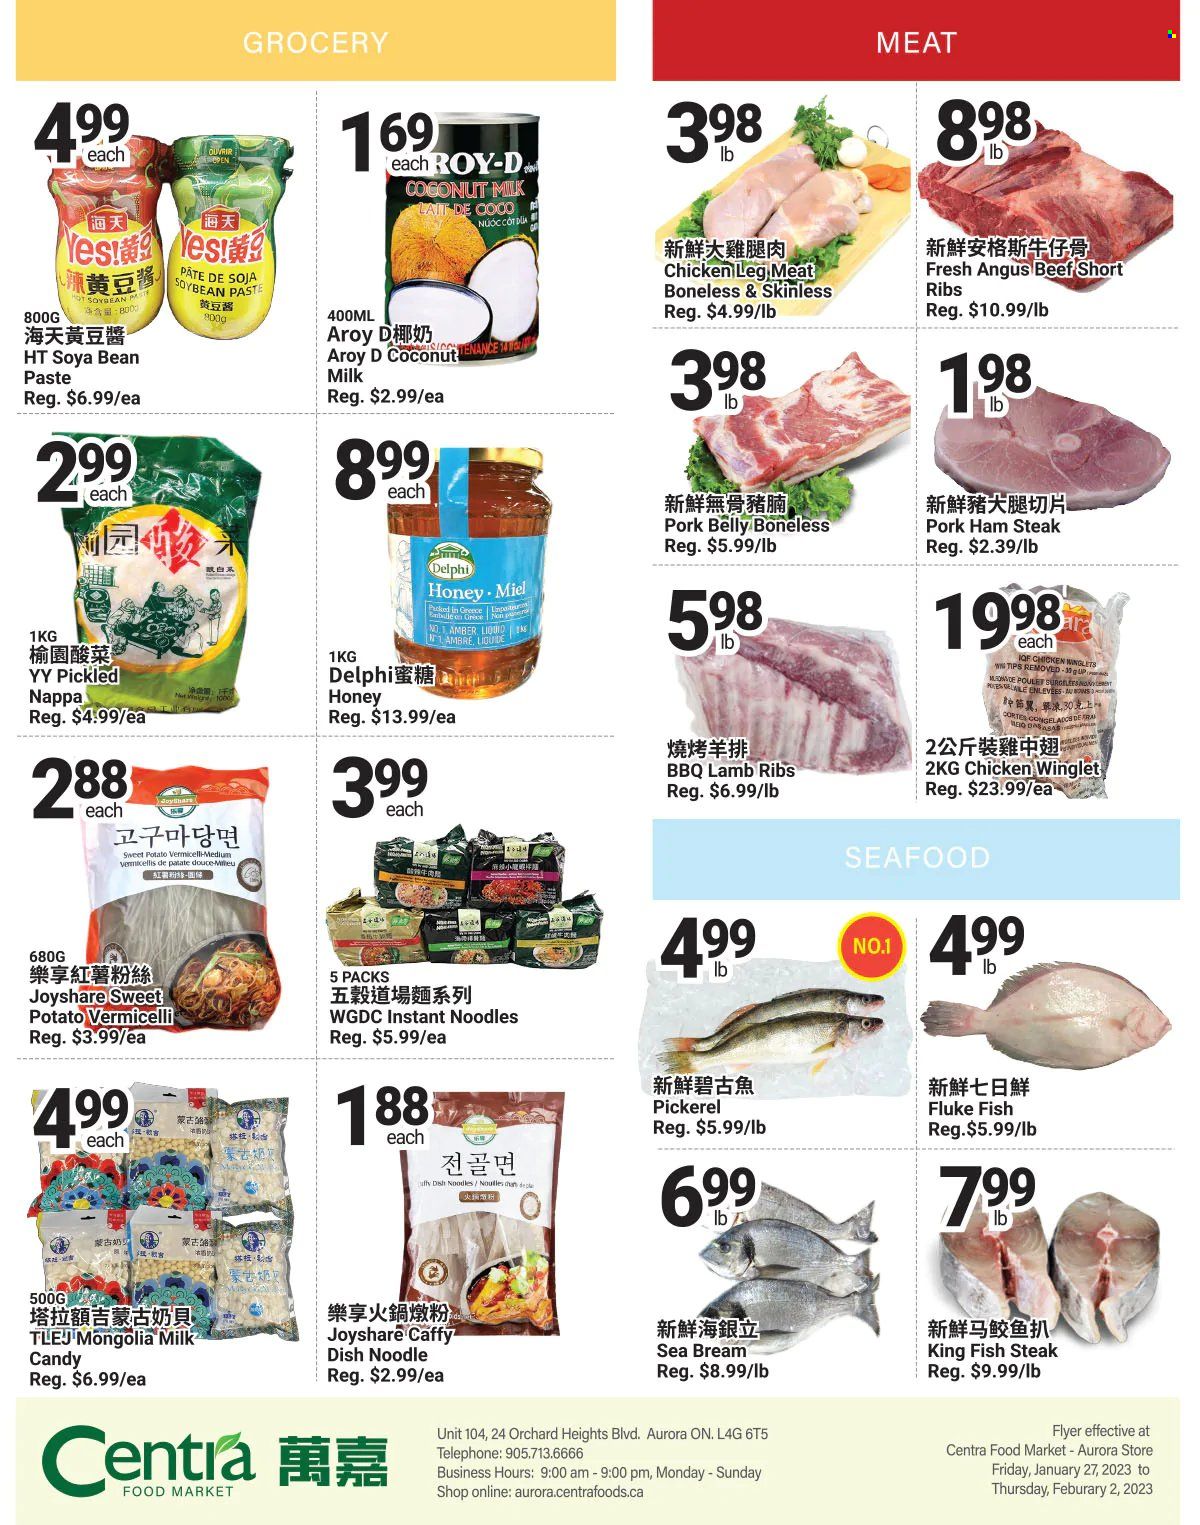 thumbnail - Centra Food Market Flyer - January 27, 2023 - February 02, 2023 - Sales products - sweet potato, seafood, fish, king fish, seabream, fish steak, walleye, instant noodles, noodles, ham, ham steaks, coconut milk, honey, chicken legs, beef meat, beef ribs, ribs, pork belly, pork meat, steak. Page 4.